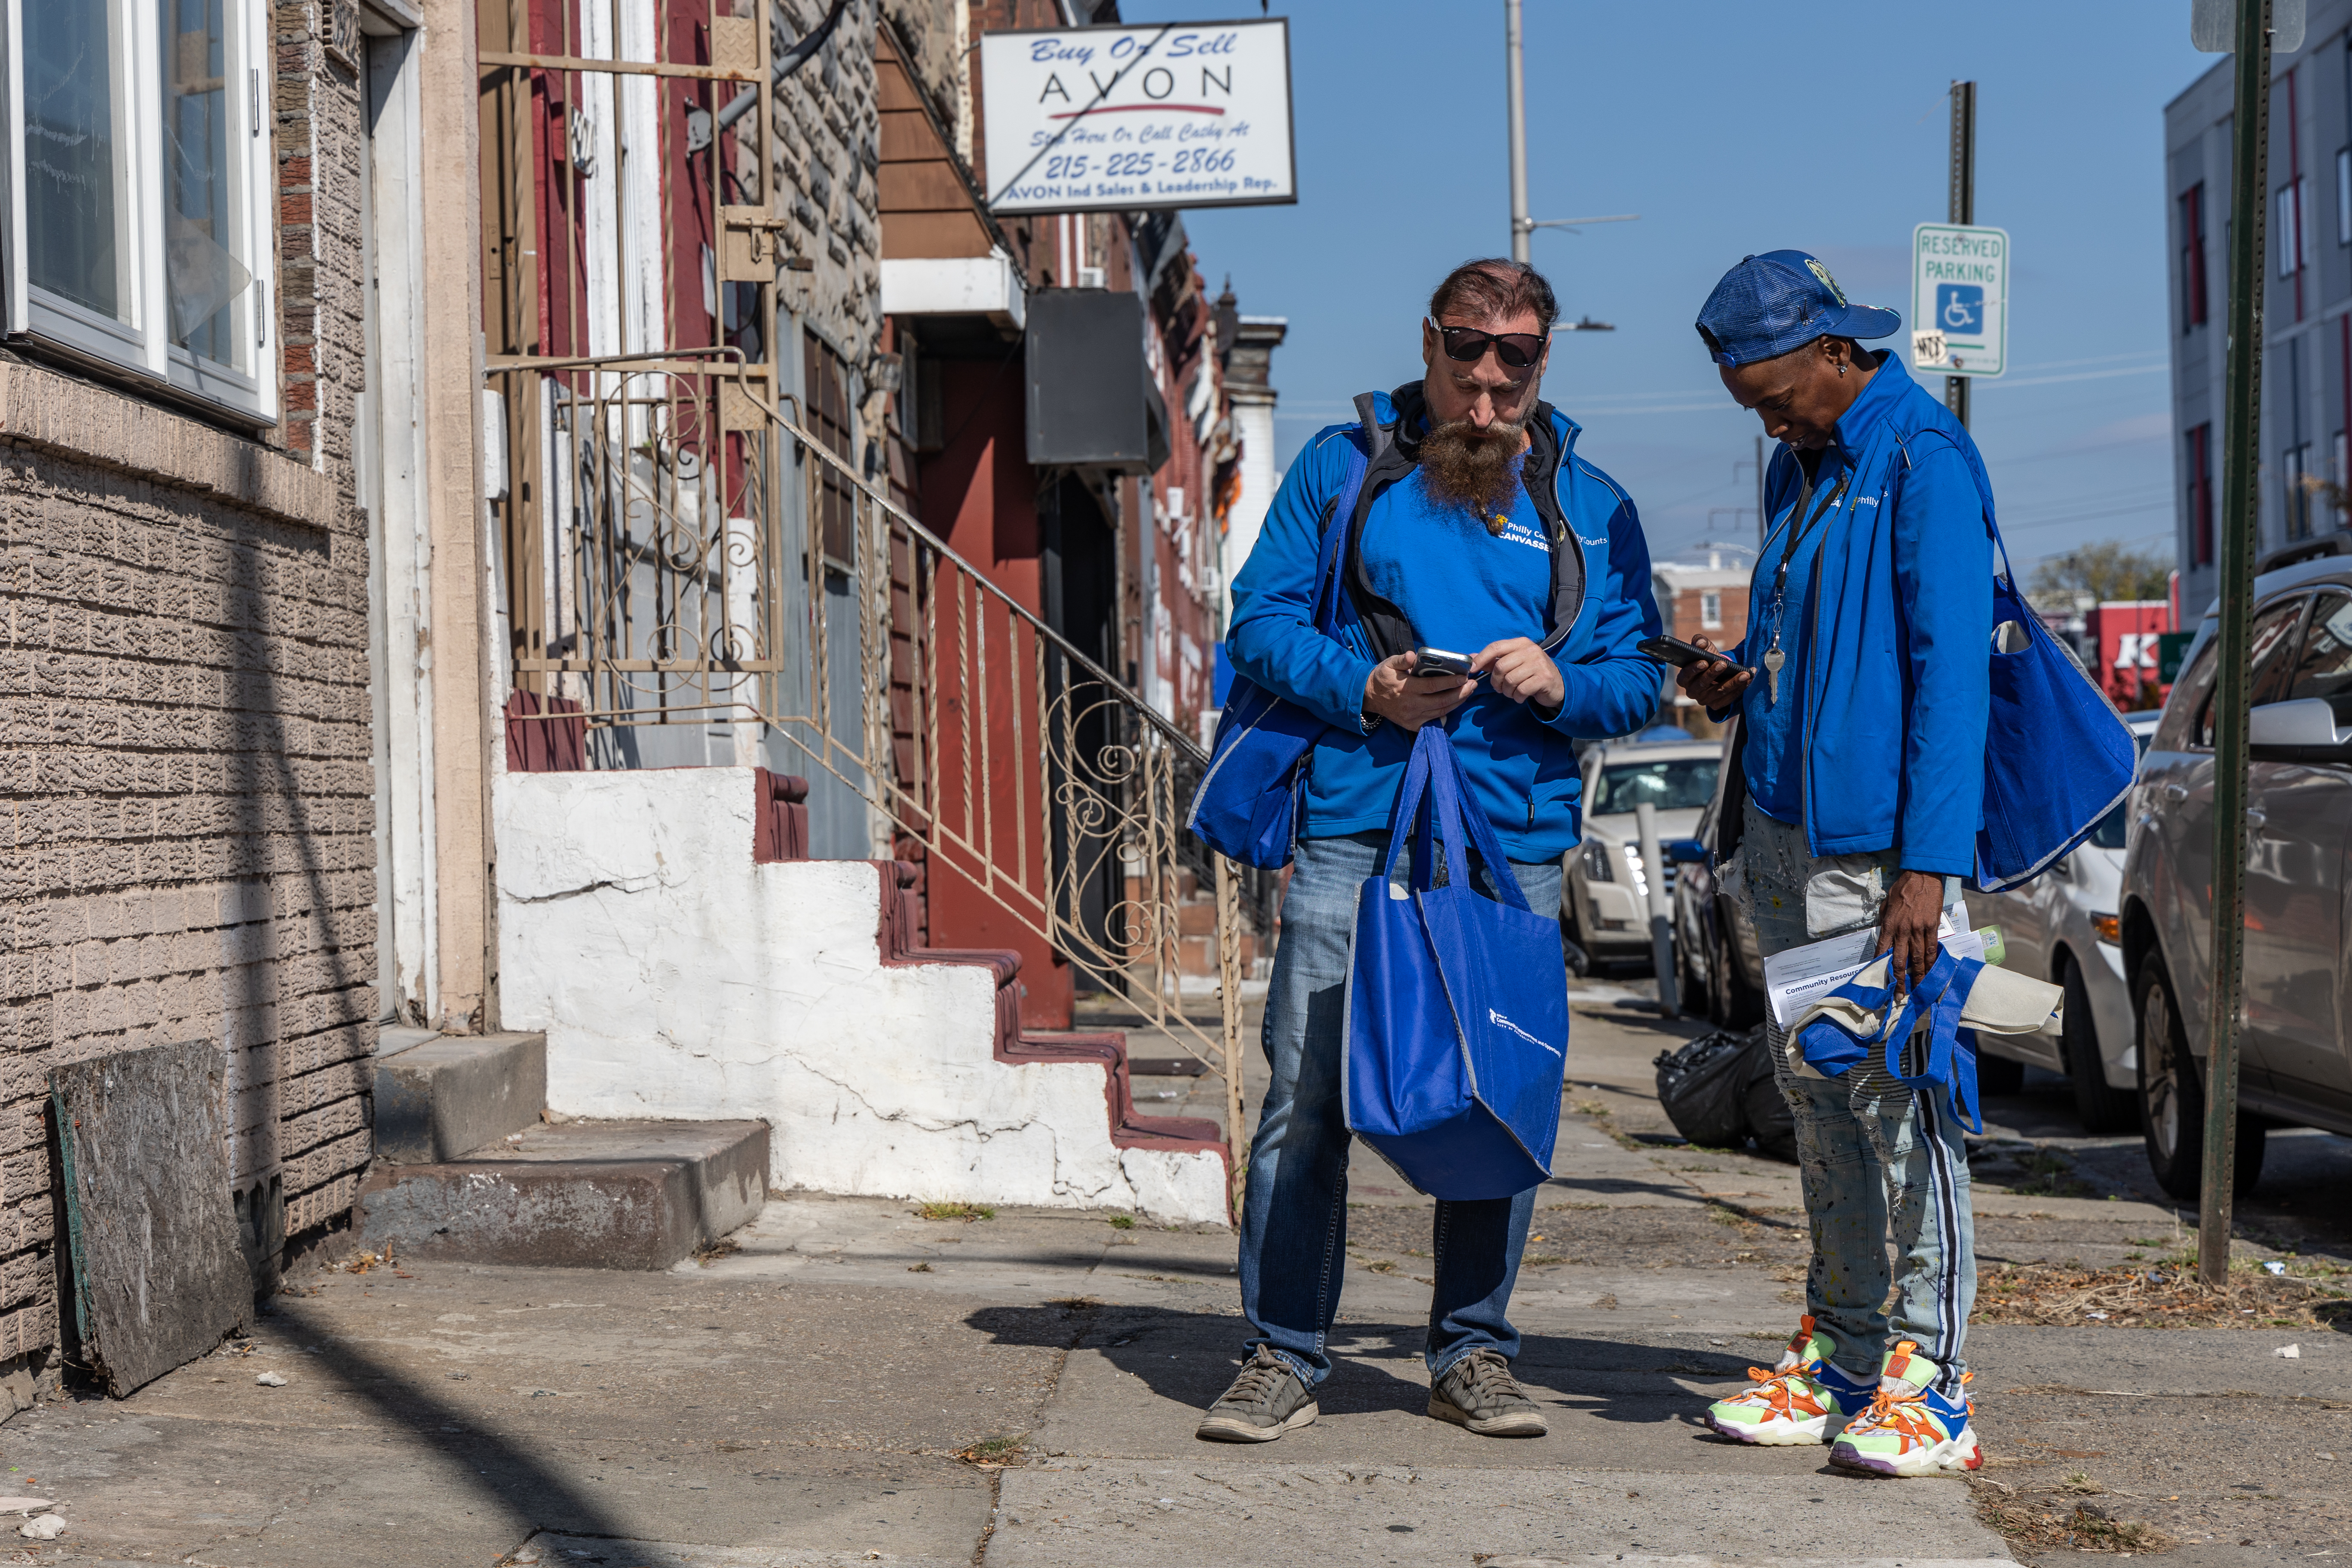 Two people in matching blue sweat jackets stand on a sidewalk looking at their phones.